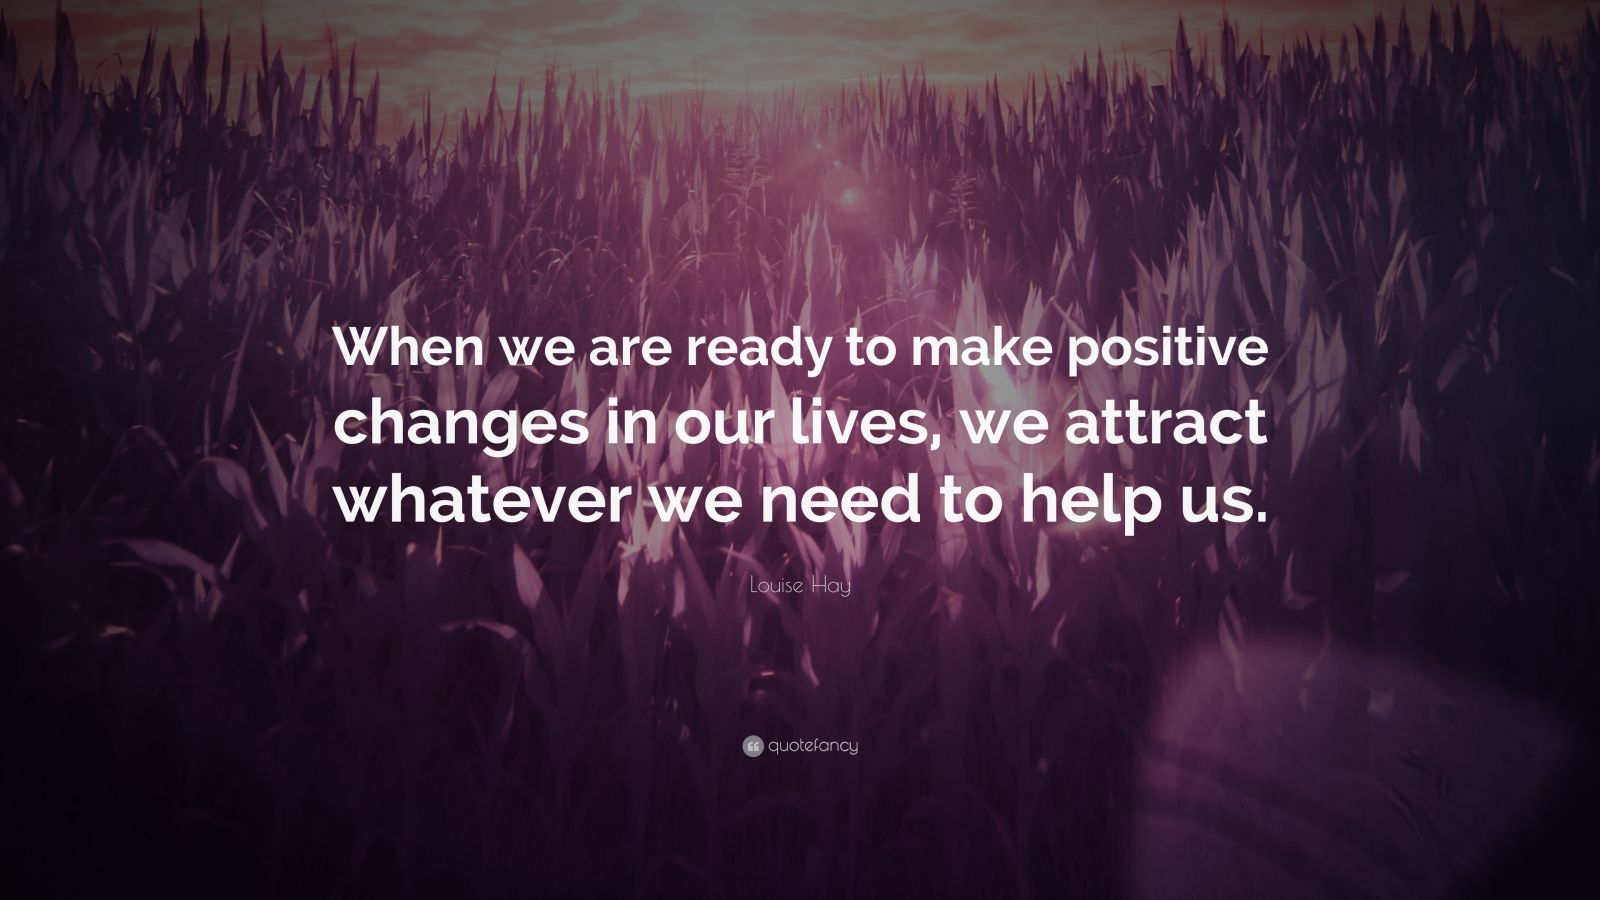 Louise Hay Quote: “When we are ready to make positive changes in our ...